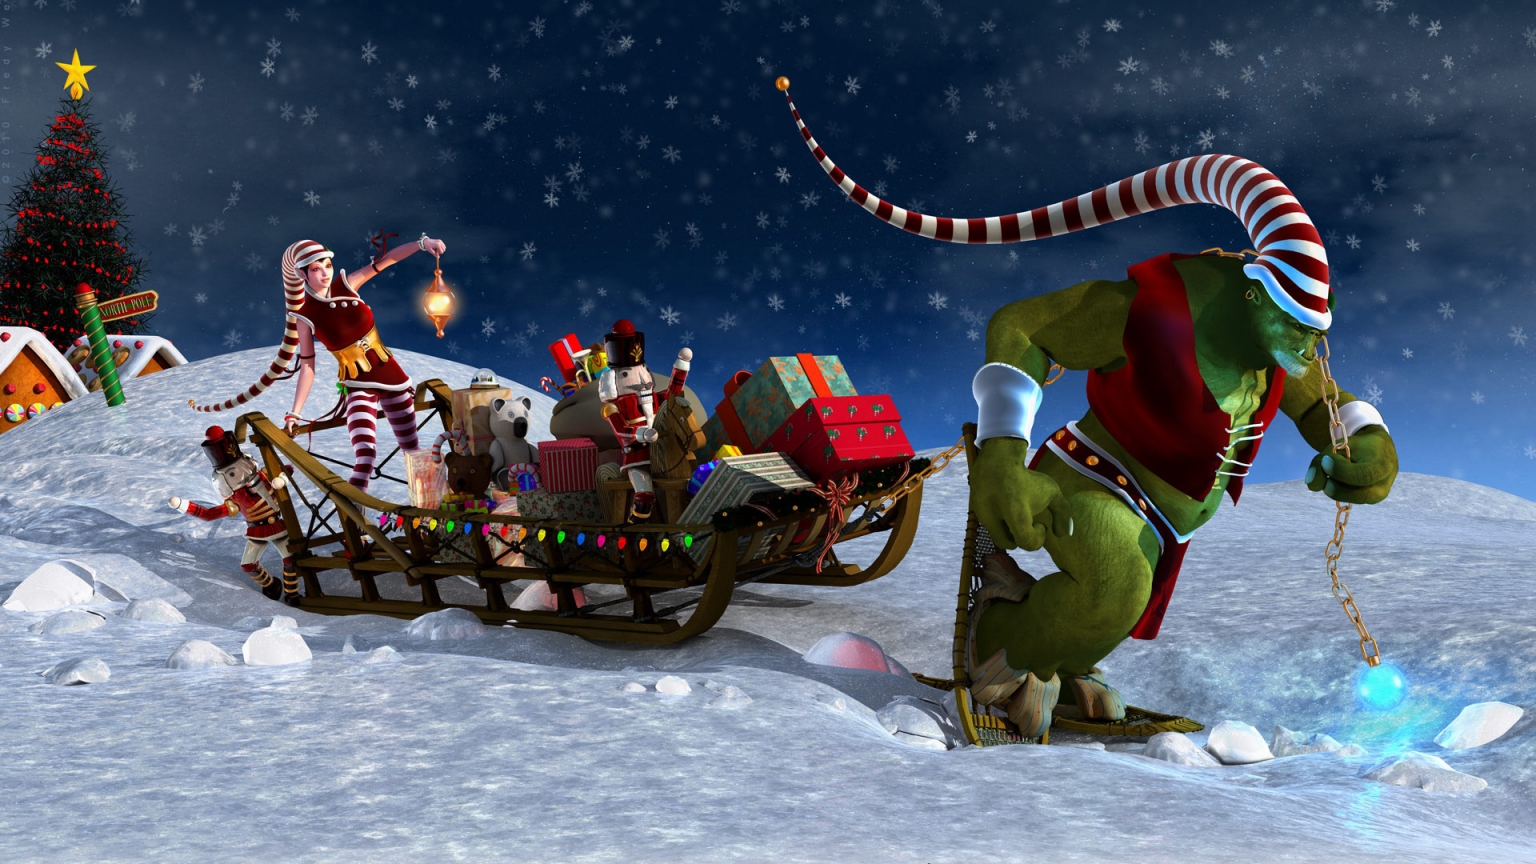 Santa Last Minute Delivery for 1536 x 864 HDTV resolution